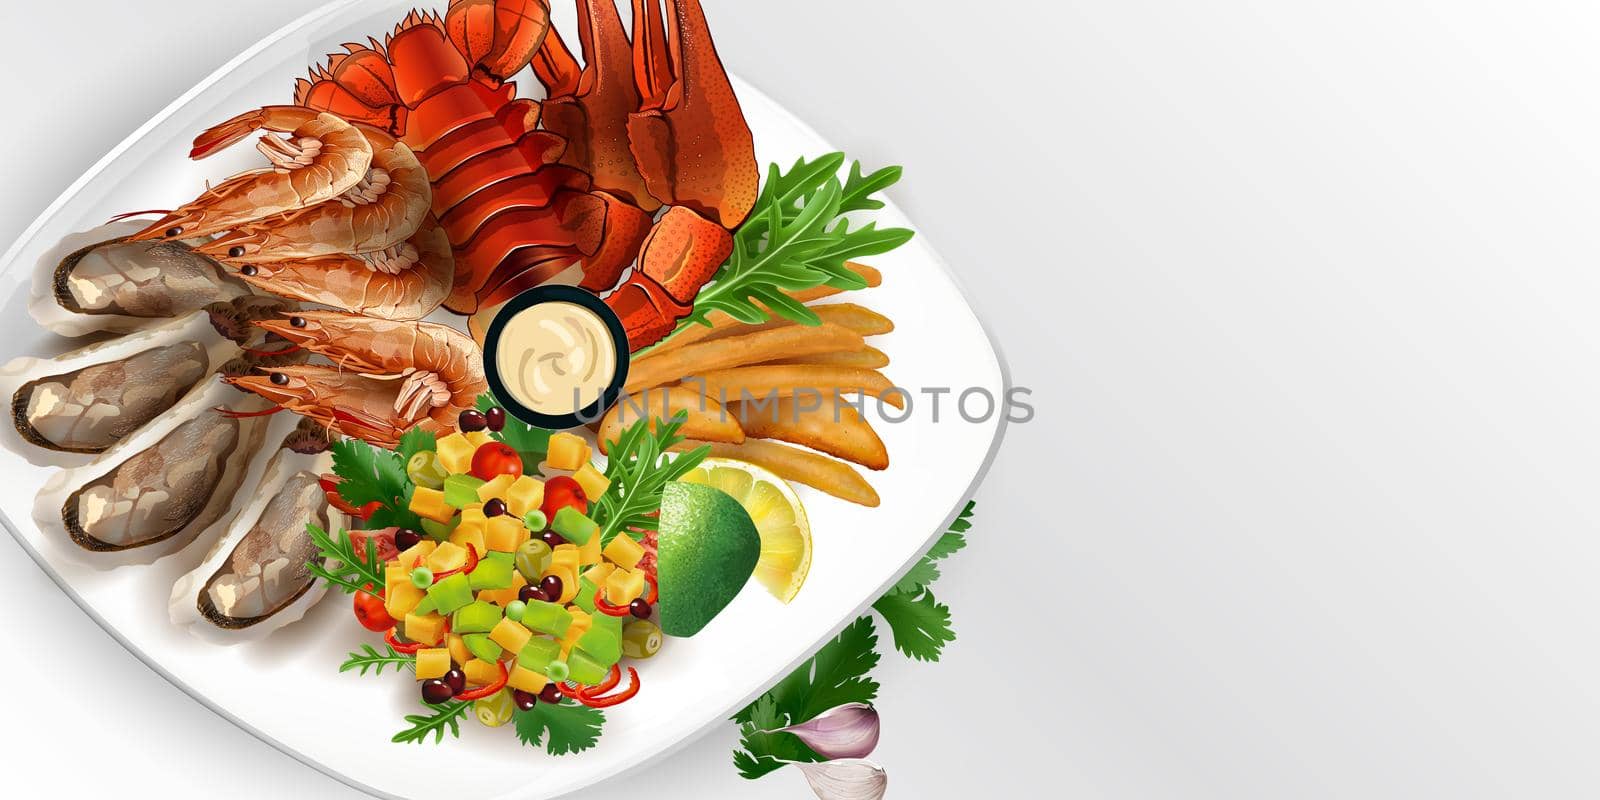 Lobster, king prawns and oysters with french fries and salad on a white plate. Realistic style illustration.